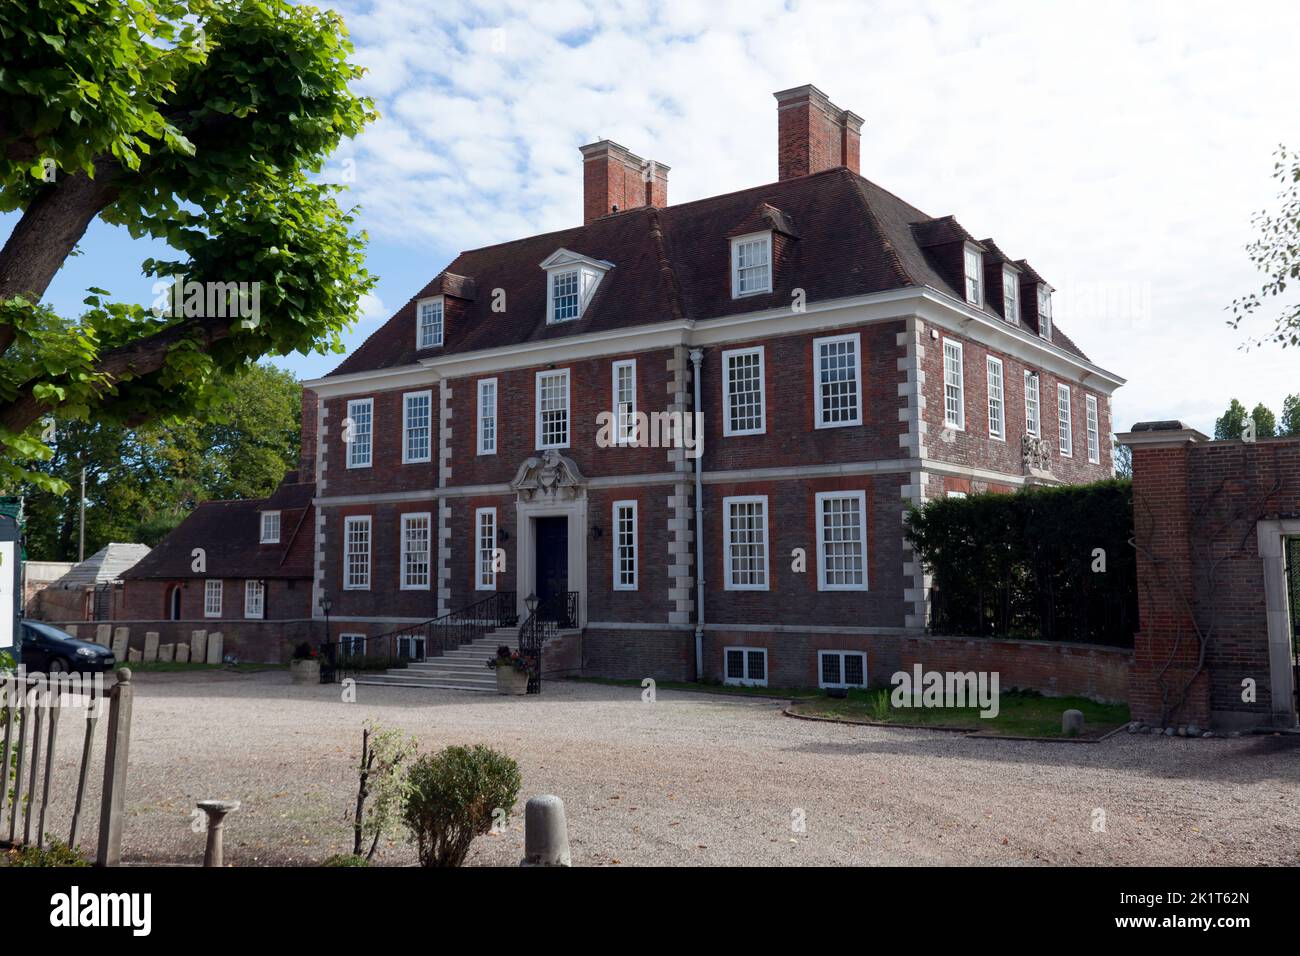 The Salutation in Sandwich, a Grade I-listed manor house designed by famous architect Sir Edwin Lutyens. Stock Photo